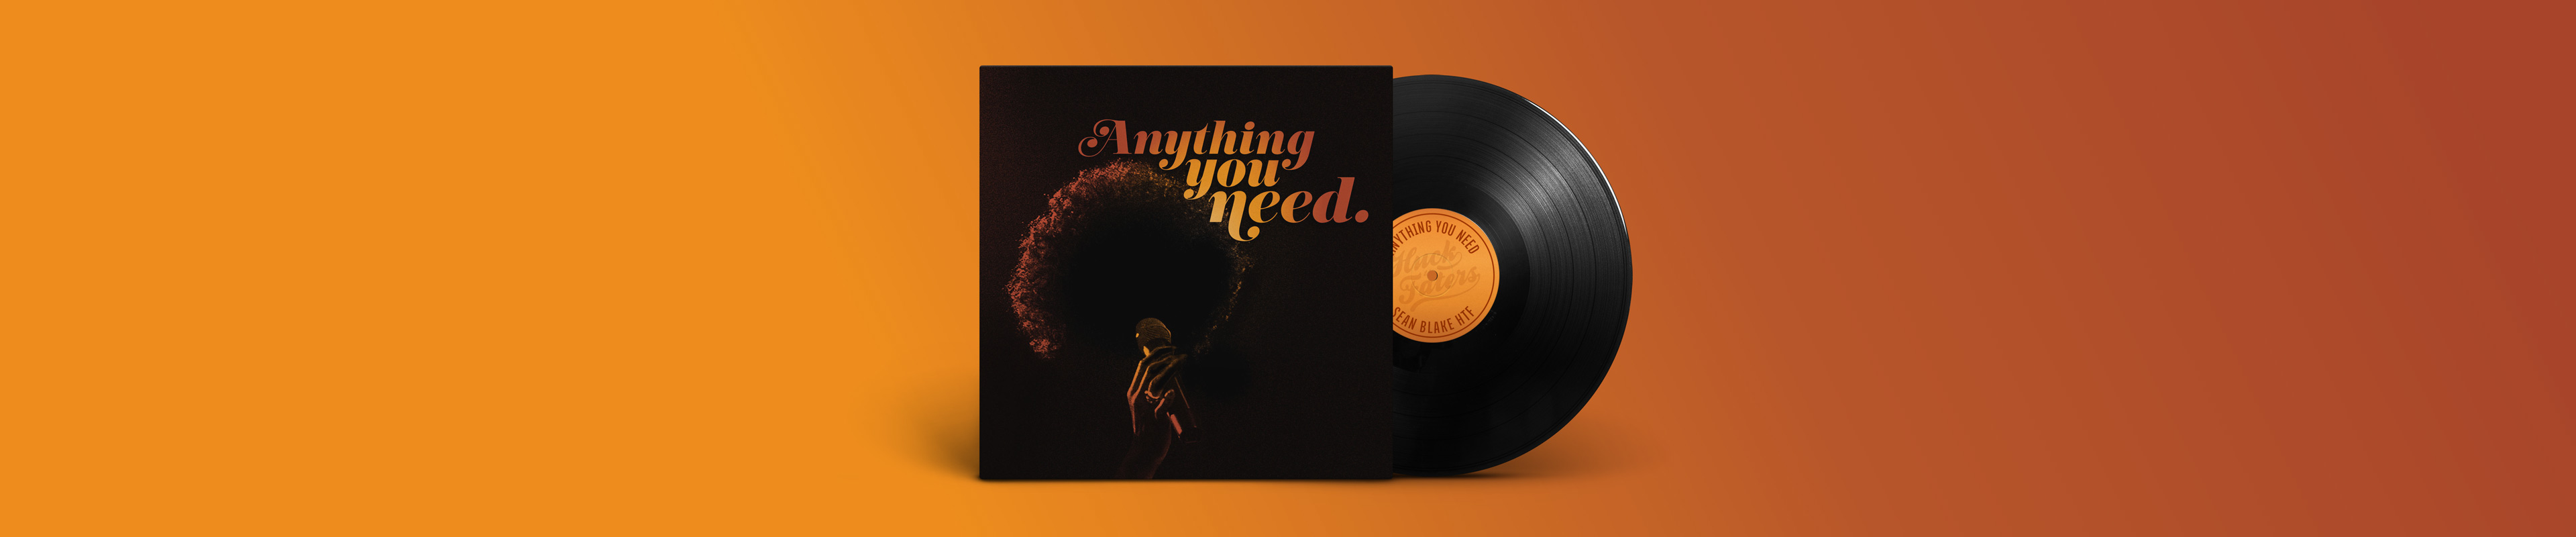 Couverture de chanson pour &#171;Anything You Need&#187;